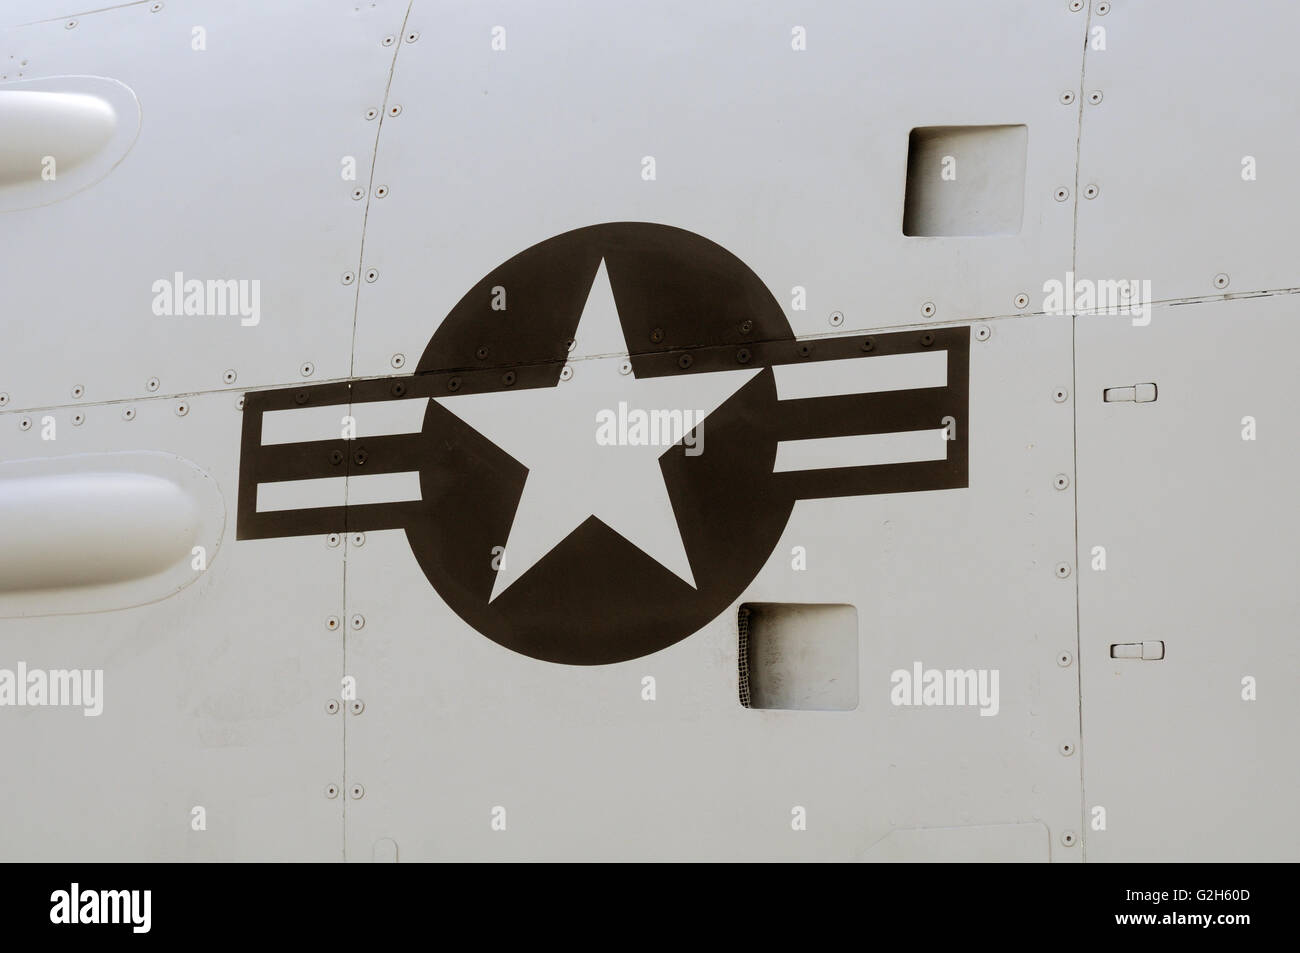 USA AIr Force logo on the side of an A10 Warthog airplane Stock Photo: 104869421 - Alamy